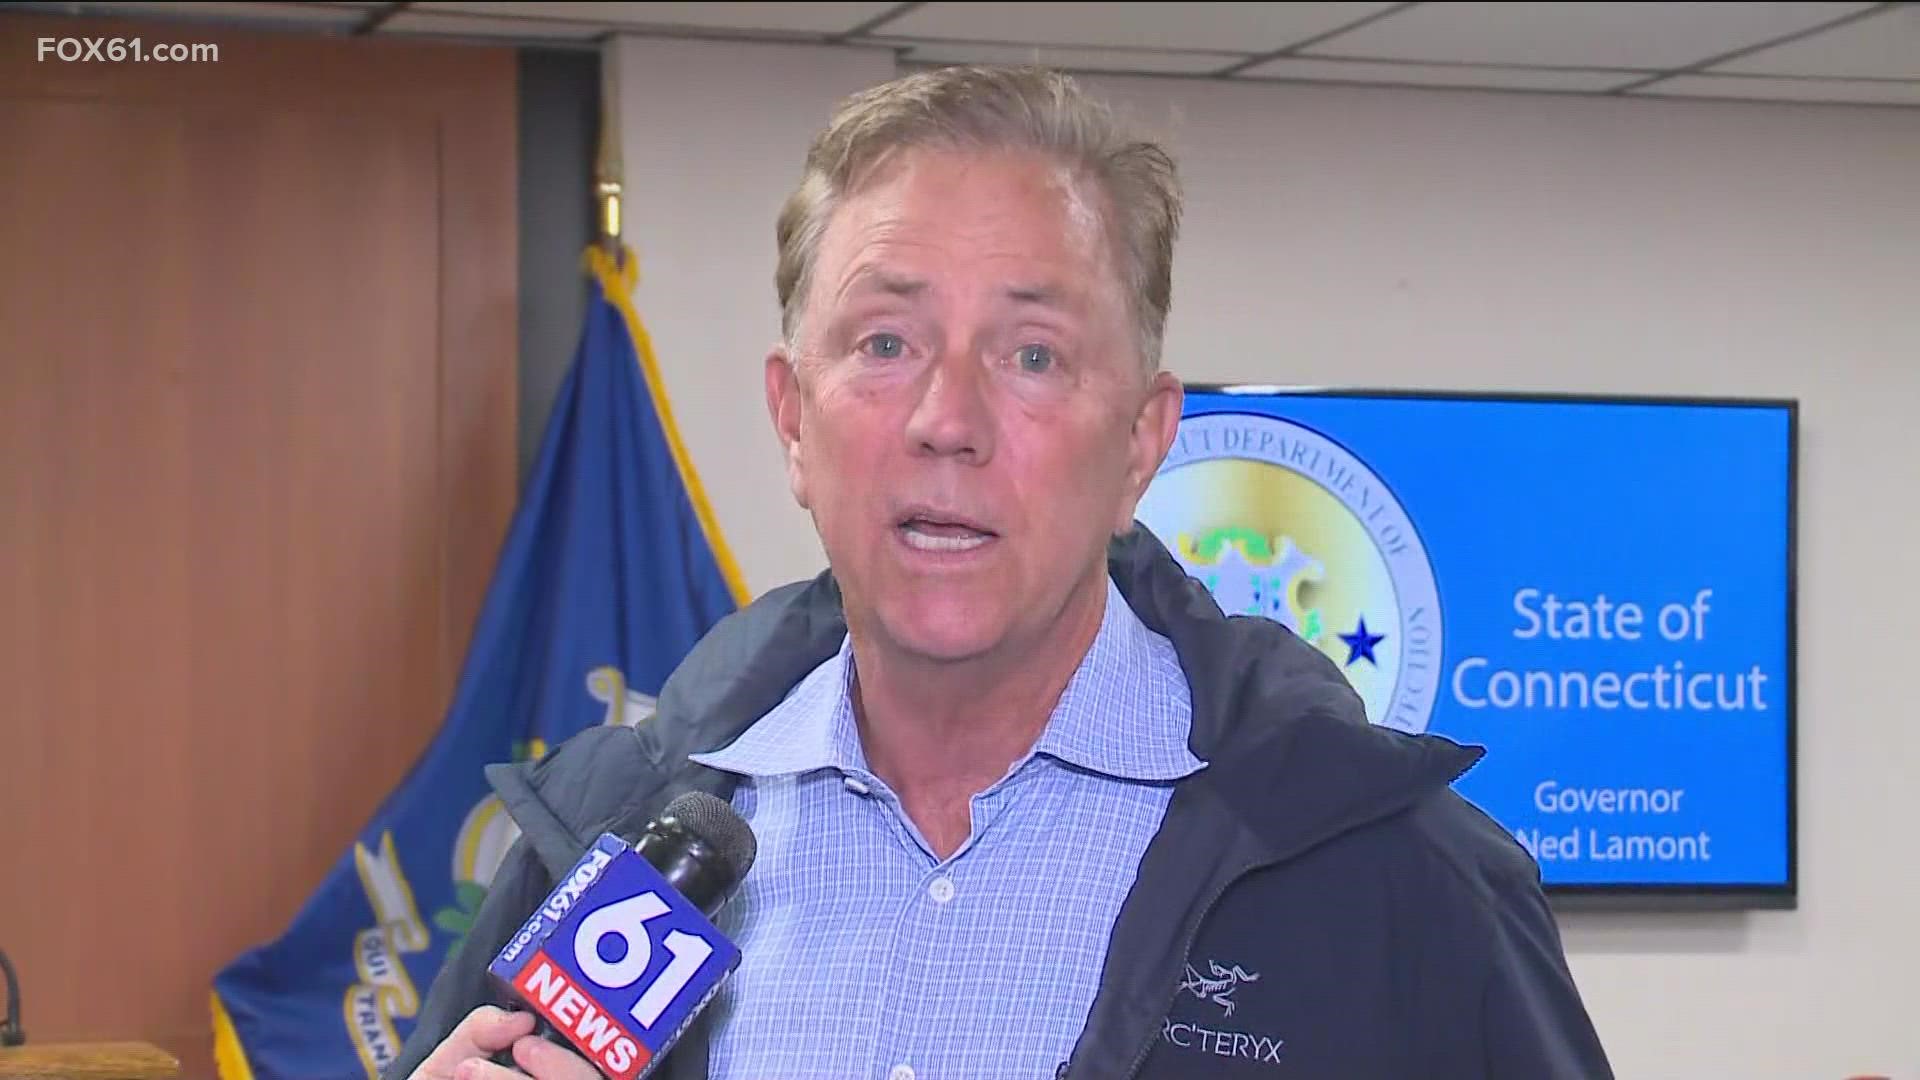 Gov. Ned Lamont at the Emergency Operations Center preparing for flooding and power outages expected ahead of Henri. He ask that residents exercise patience.